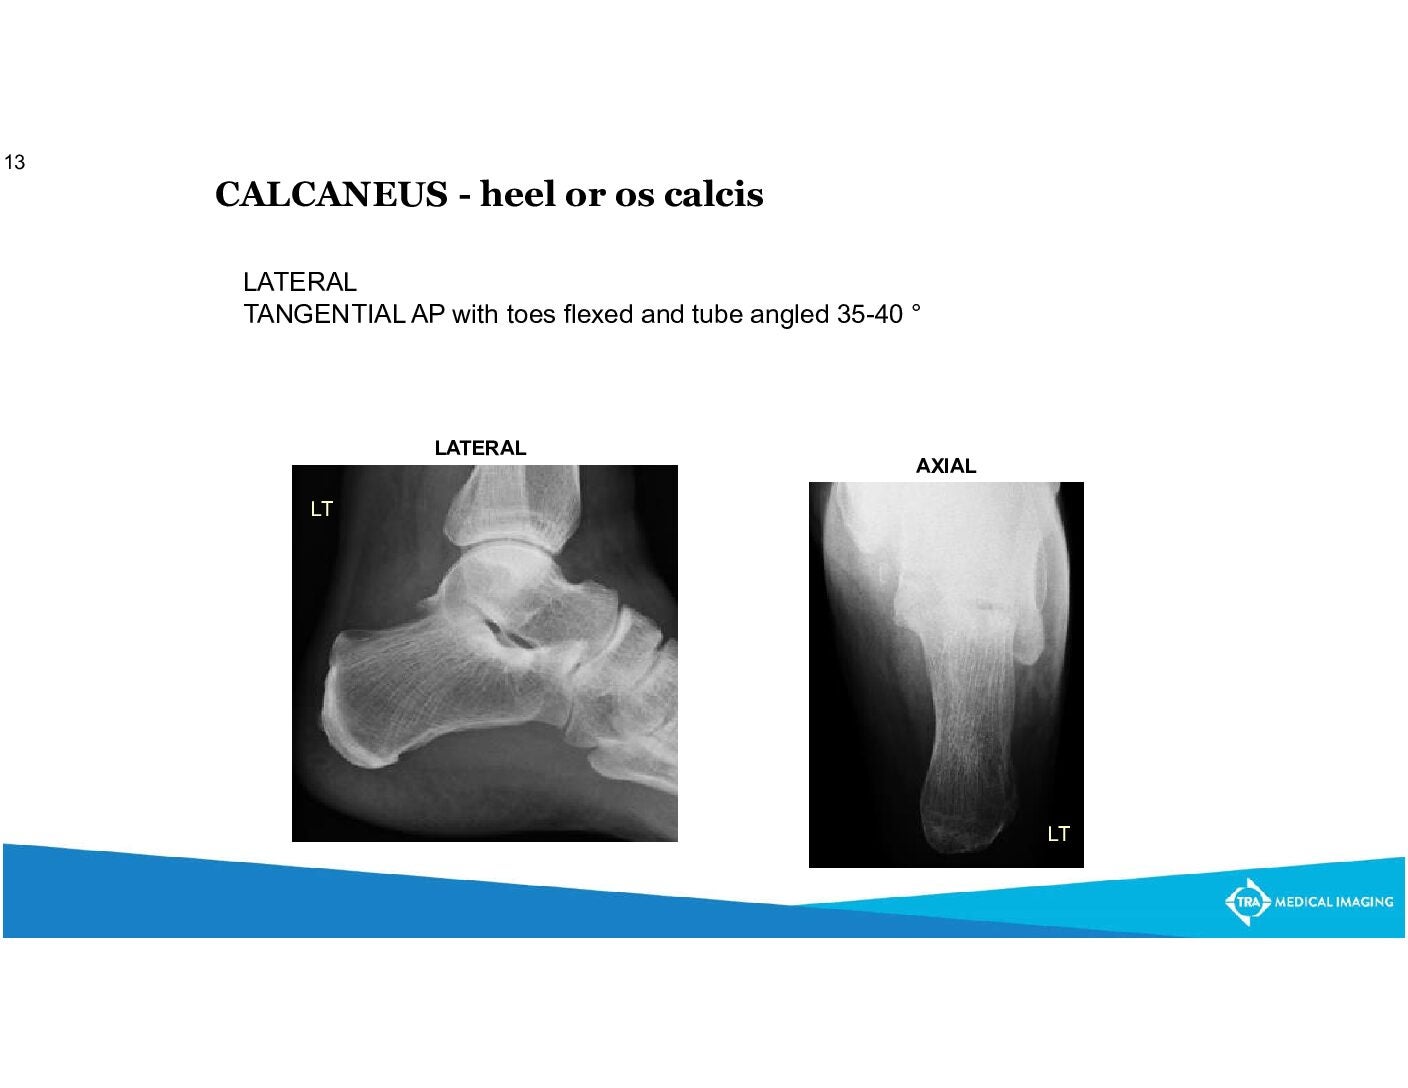 Tongue-Type Calcaneal Fracture due to a Low-Energy Injury